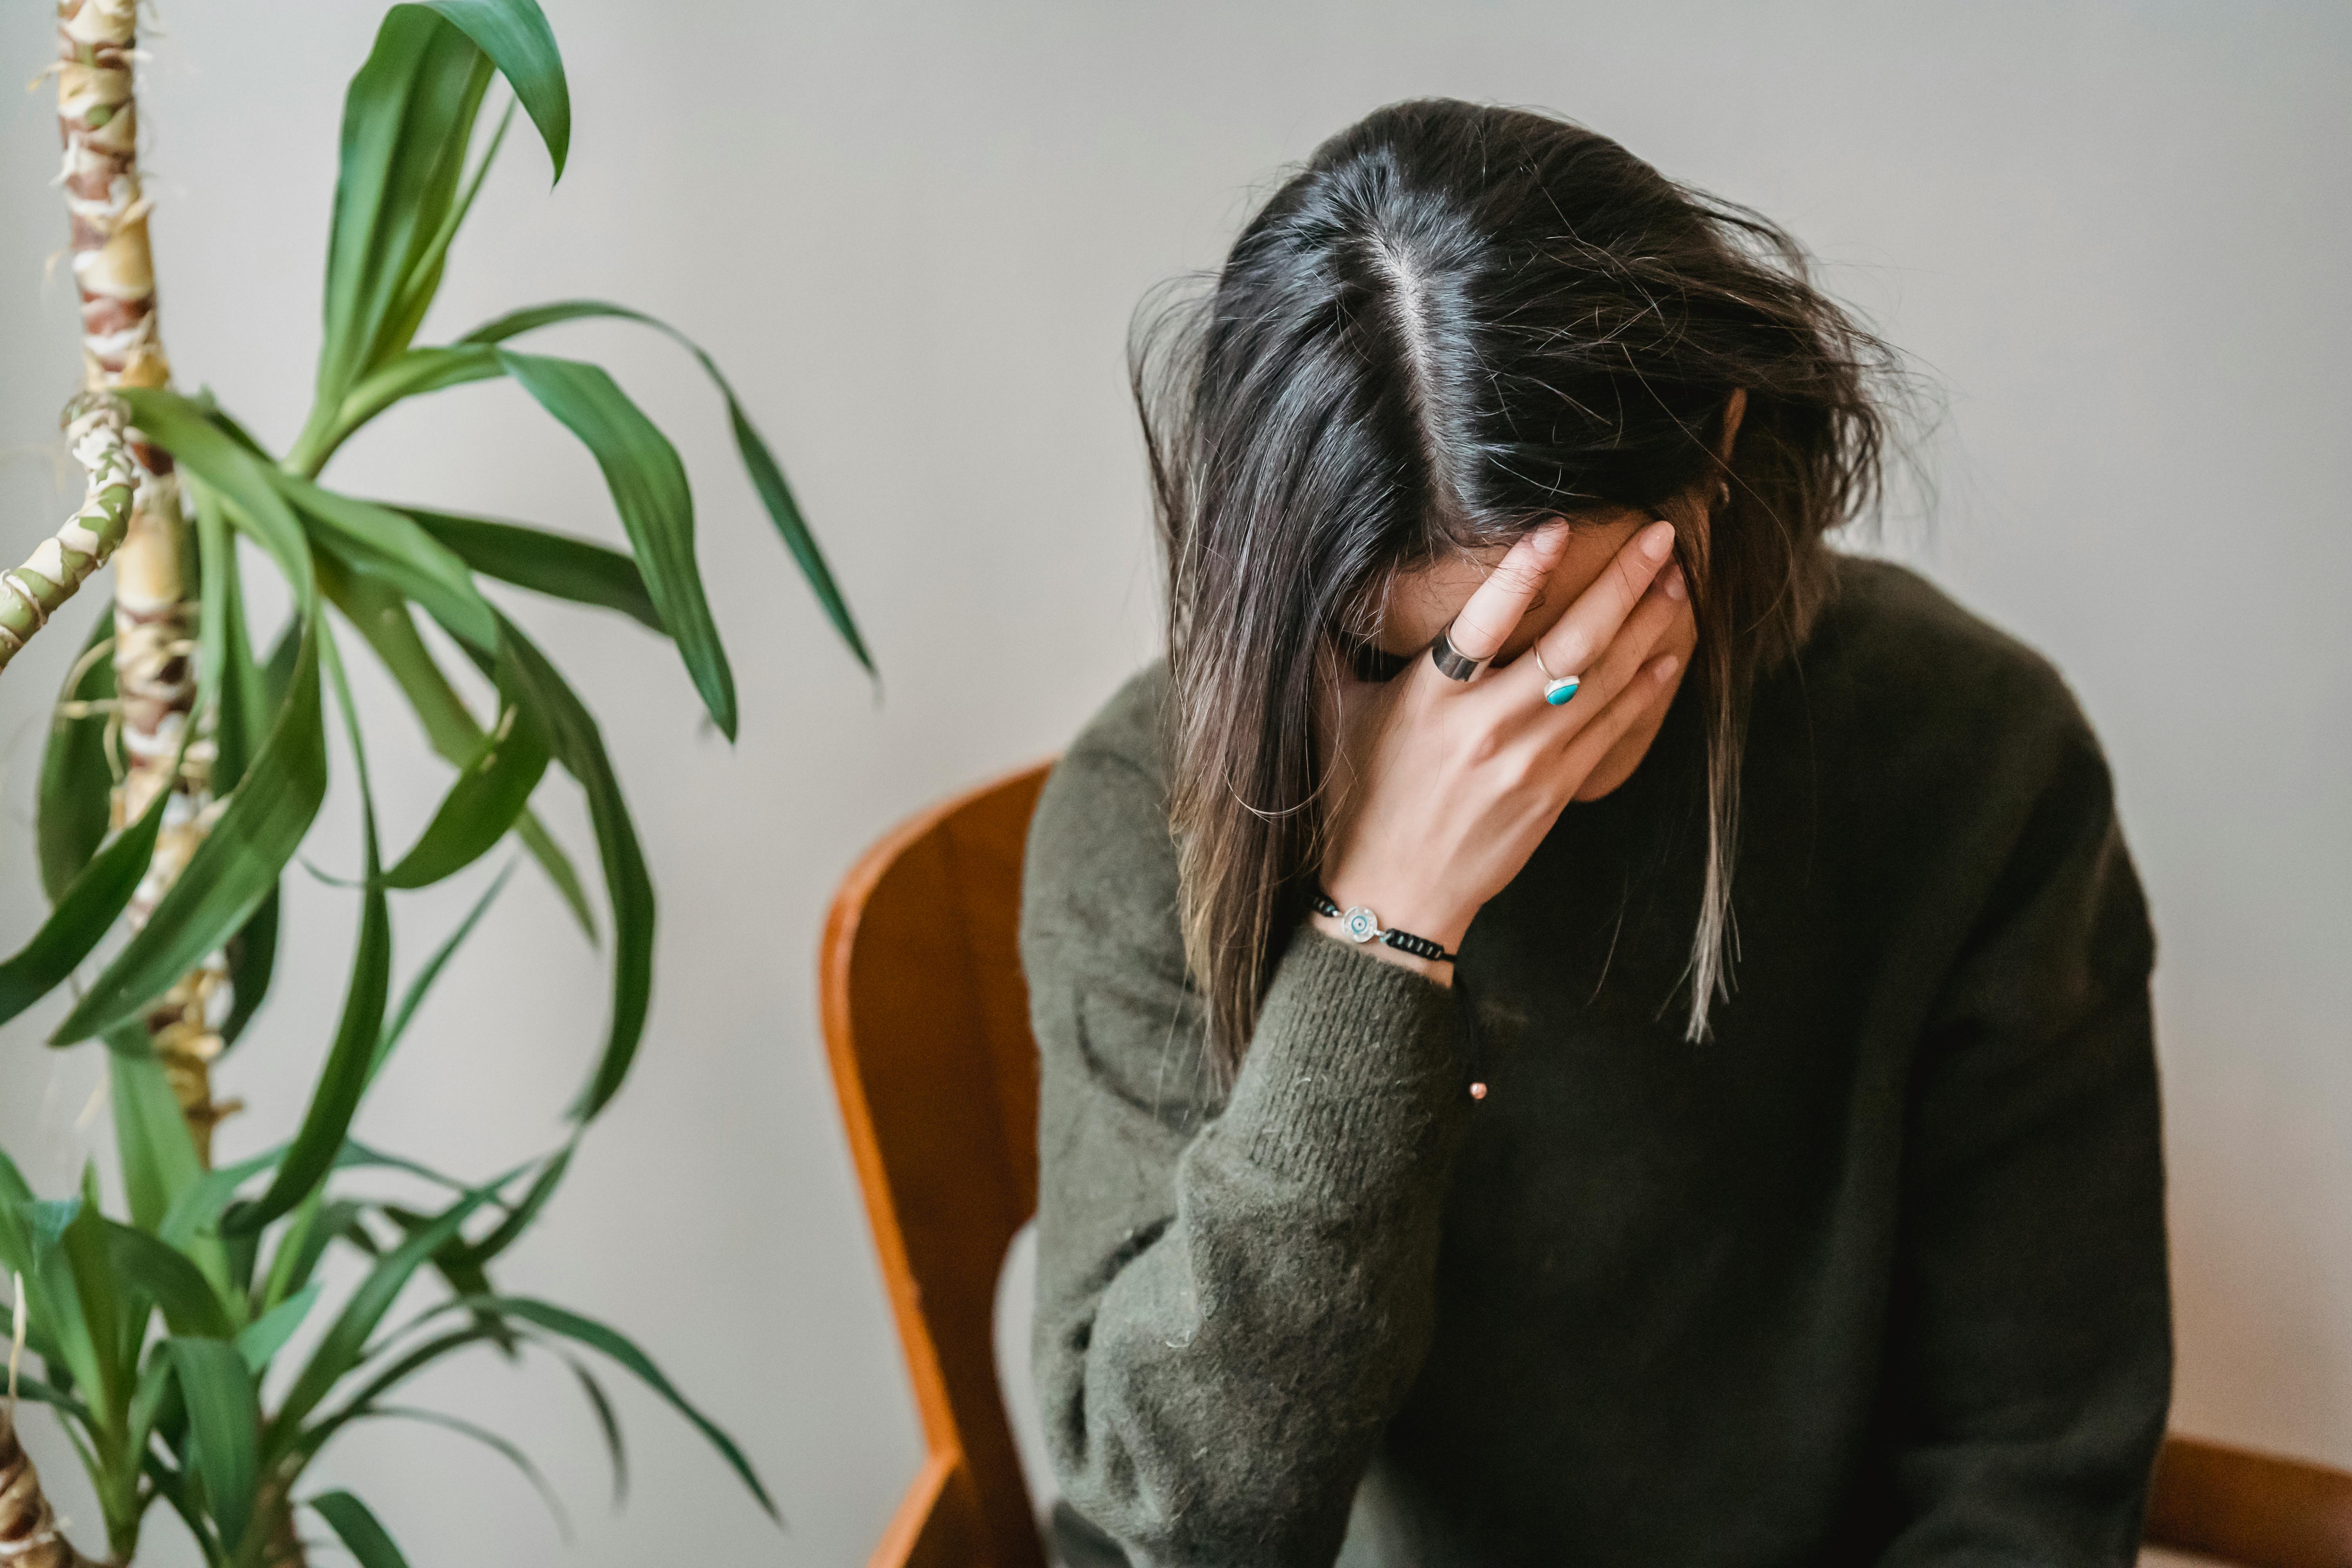 A devastated young woman | Source: Pexels